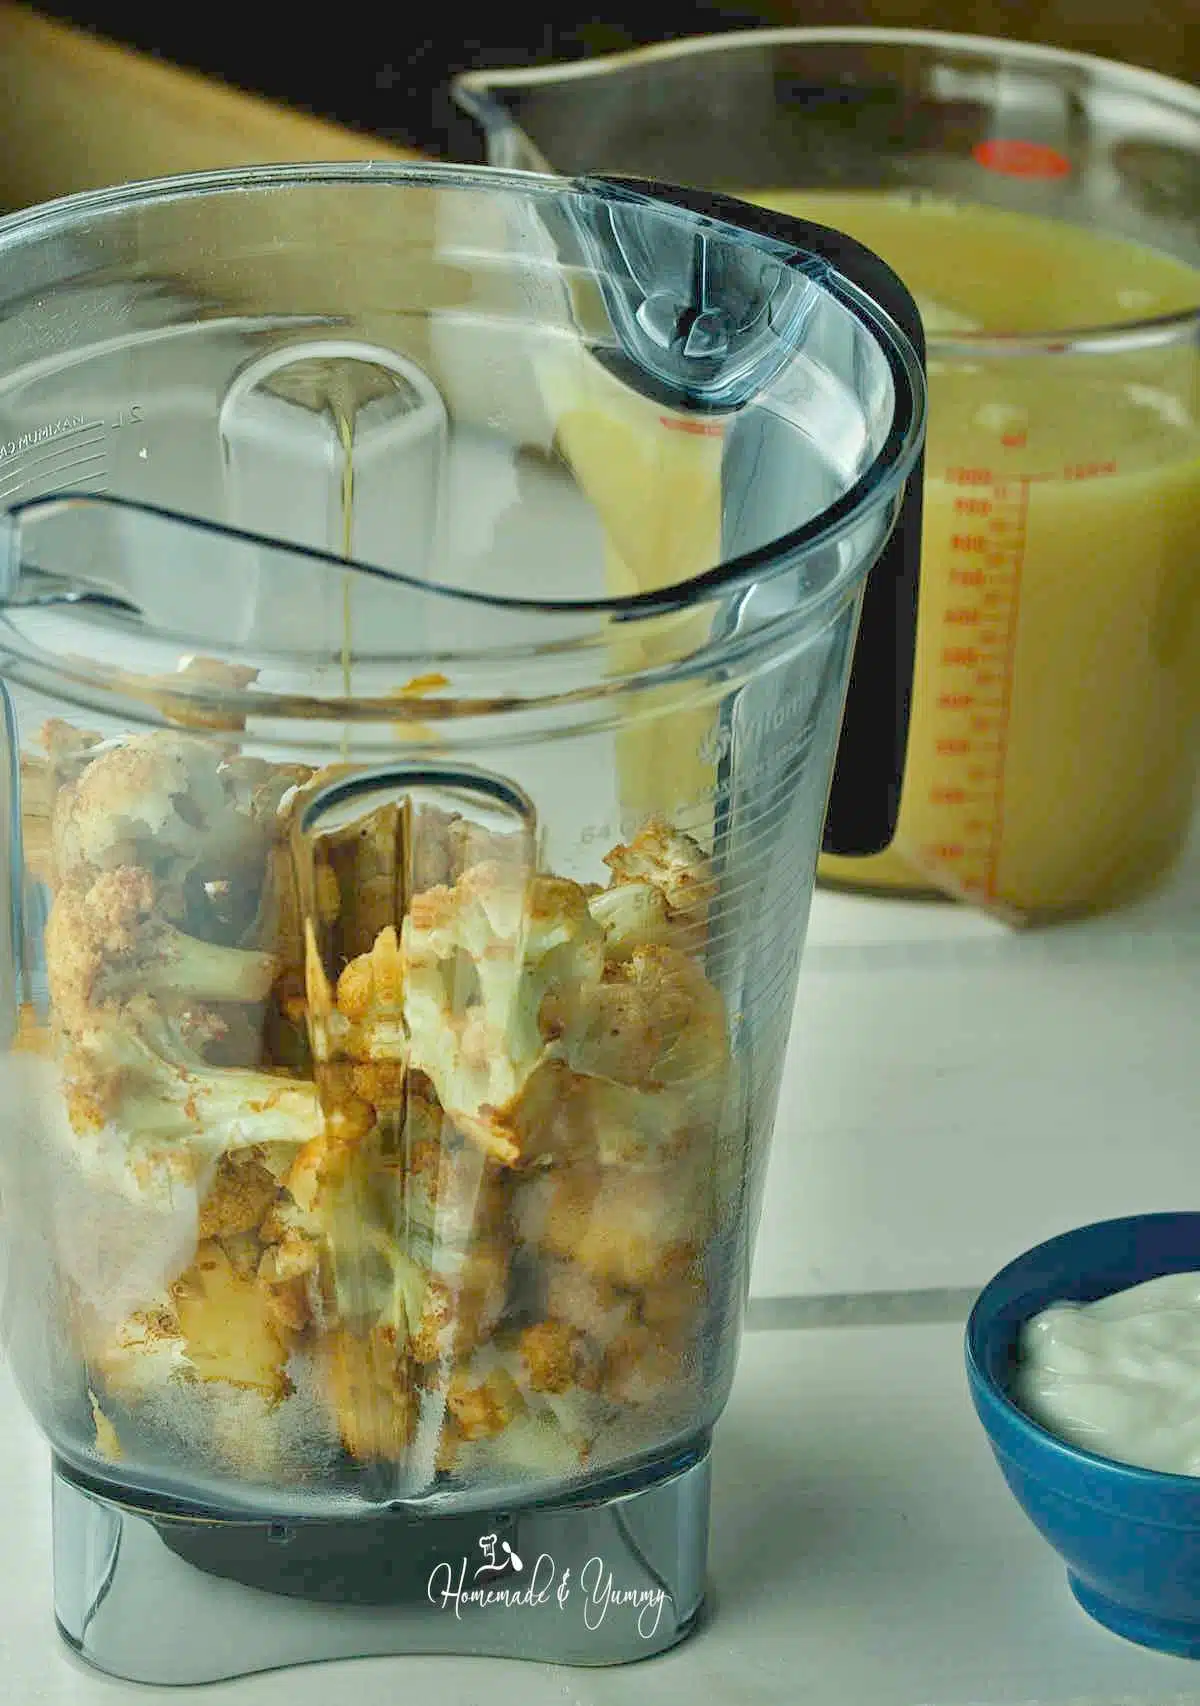 Pieces of roasted cauliflower in a blender.